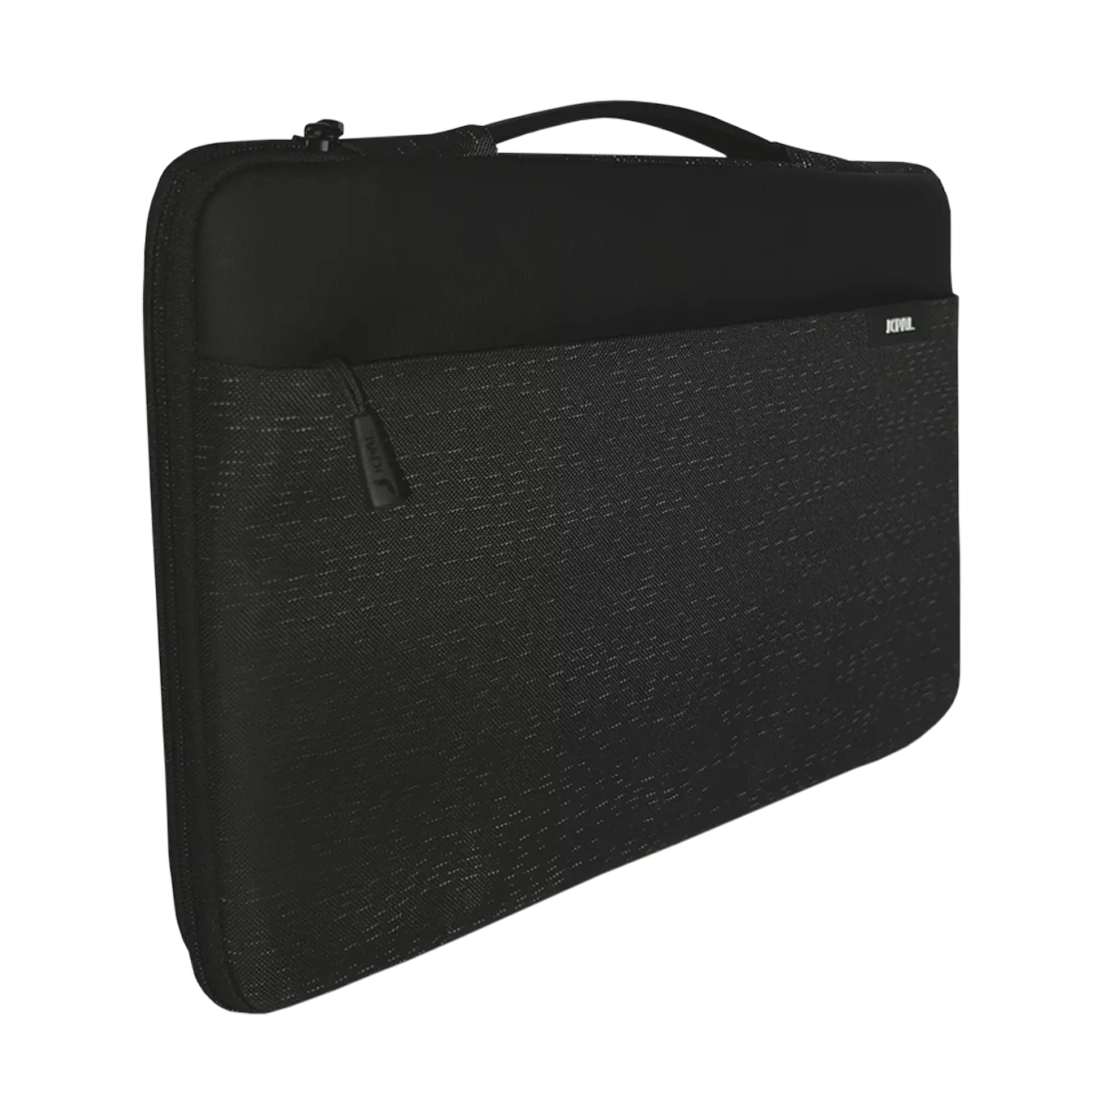 Jcpal Transit Sleeve Protection for Macbook 13-inch And 14-inch